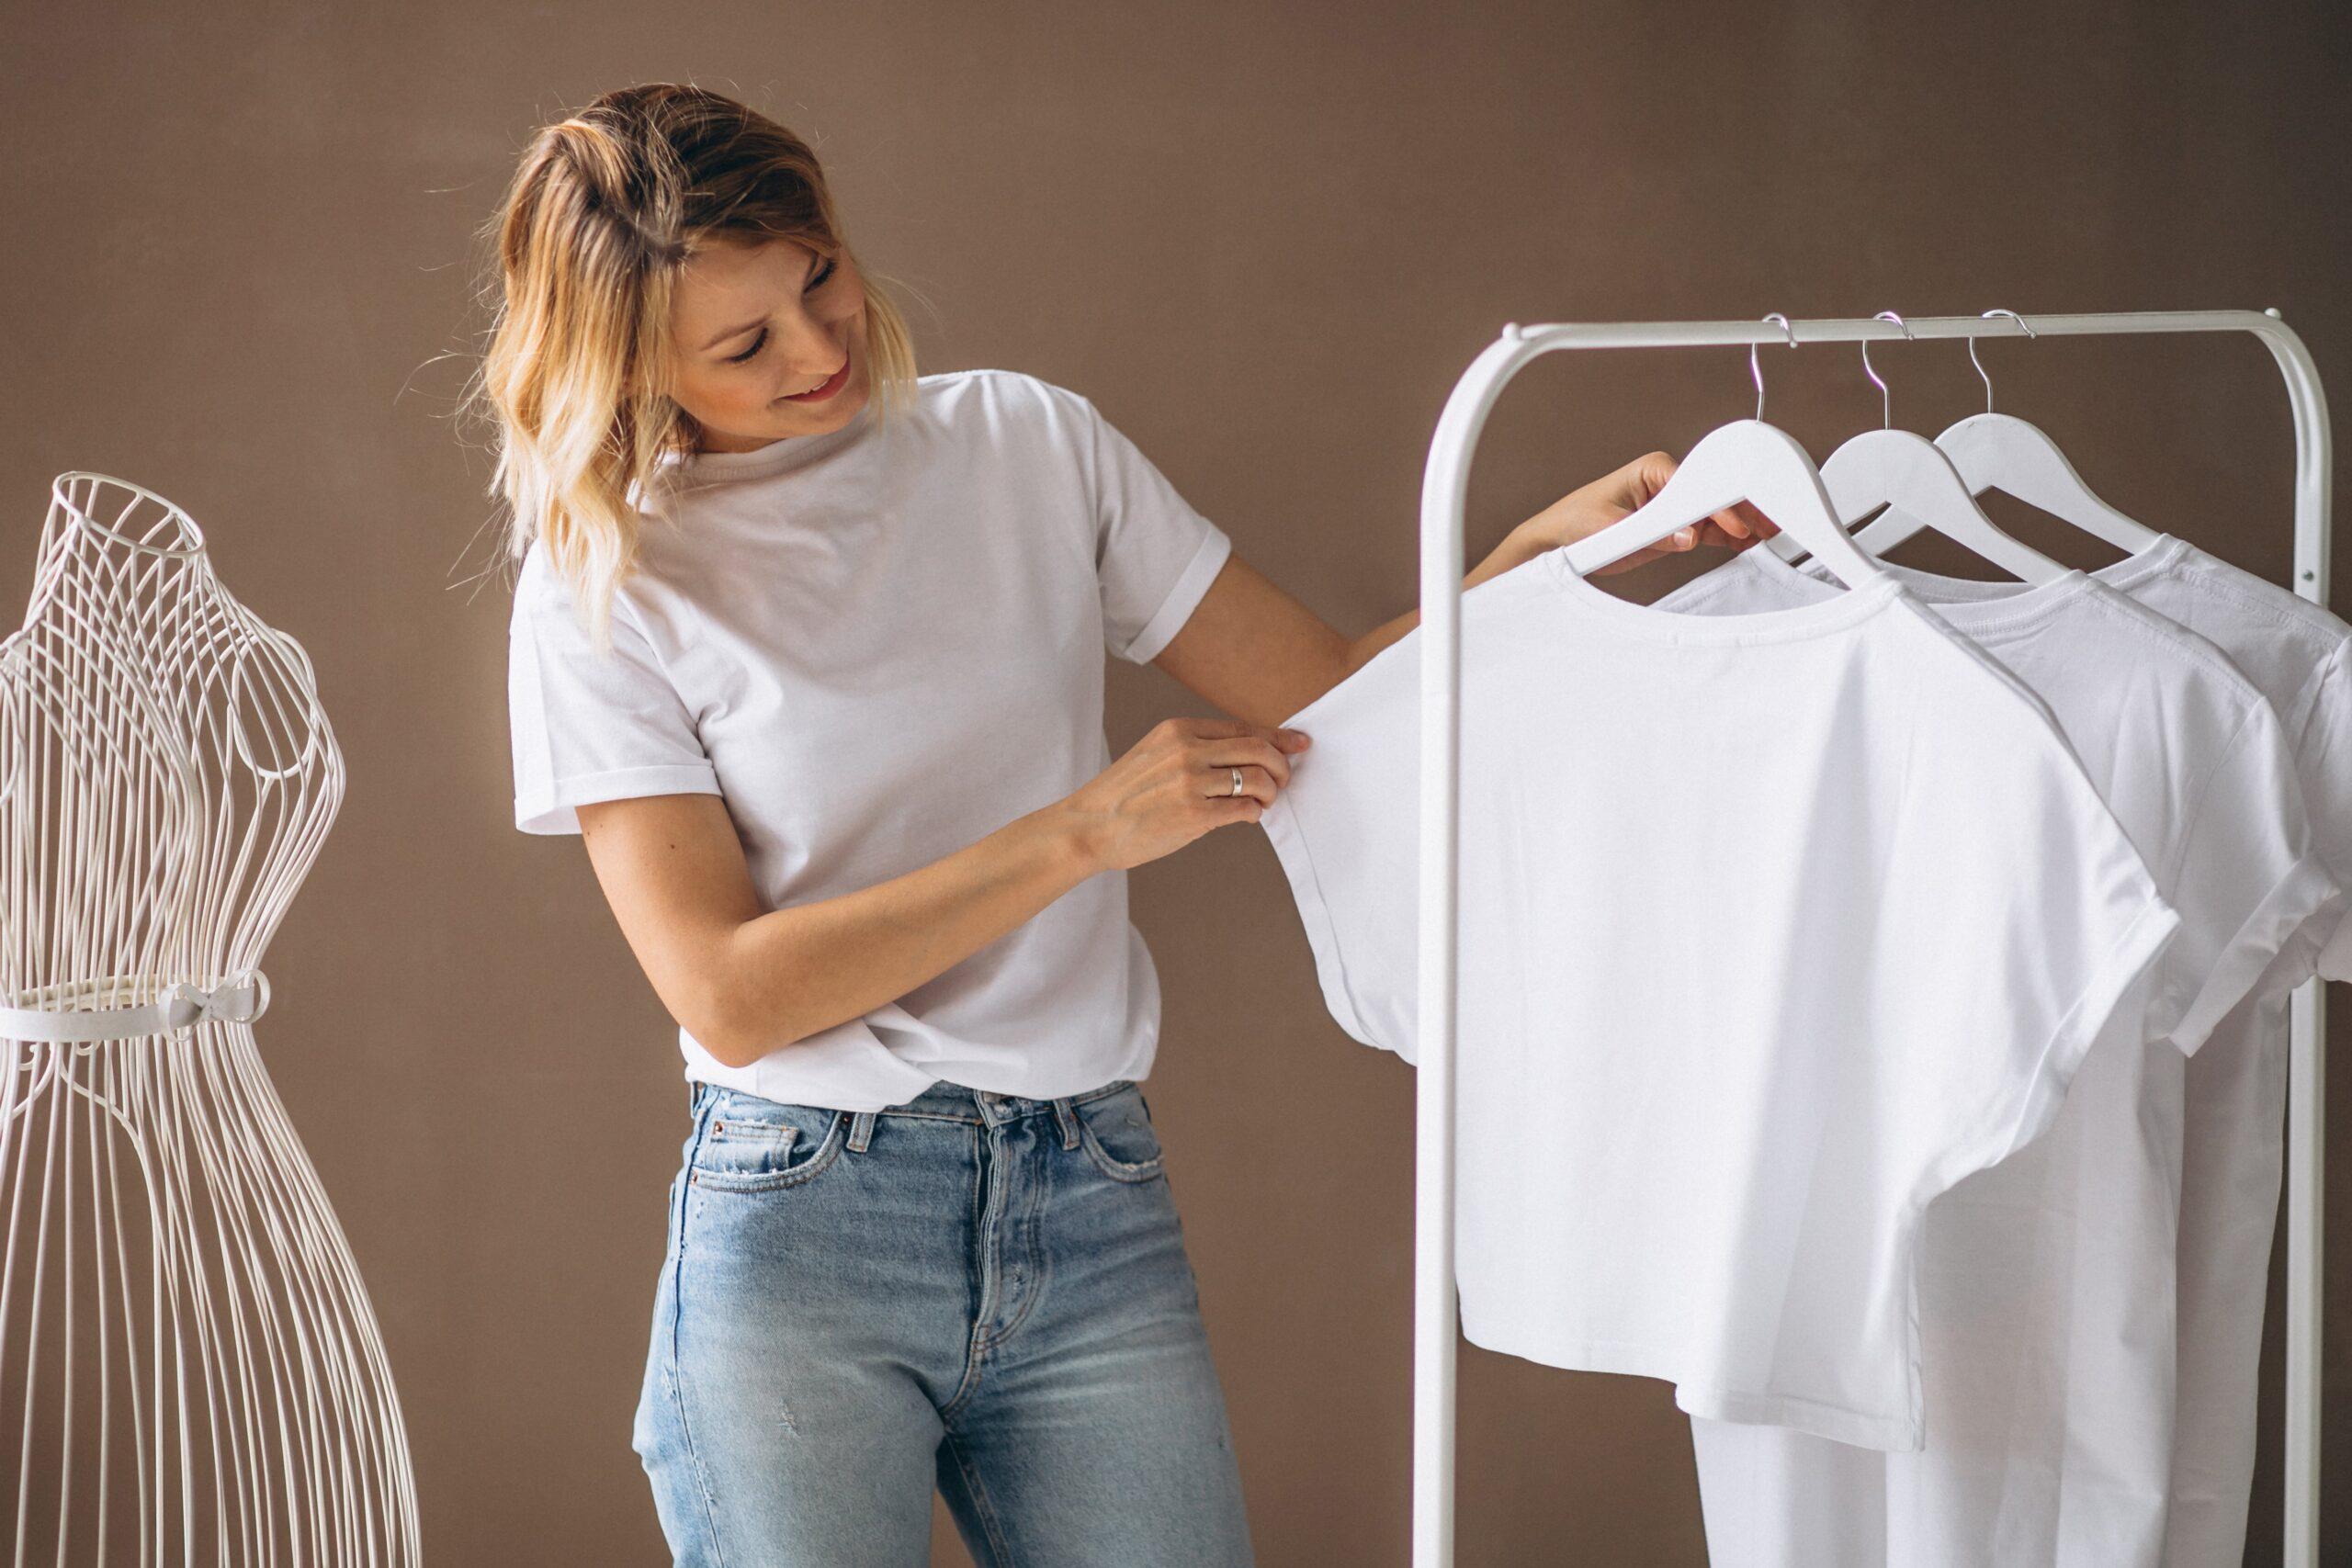 Women’s Shirt Size Compared to Unisex: Finding the Right Fit